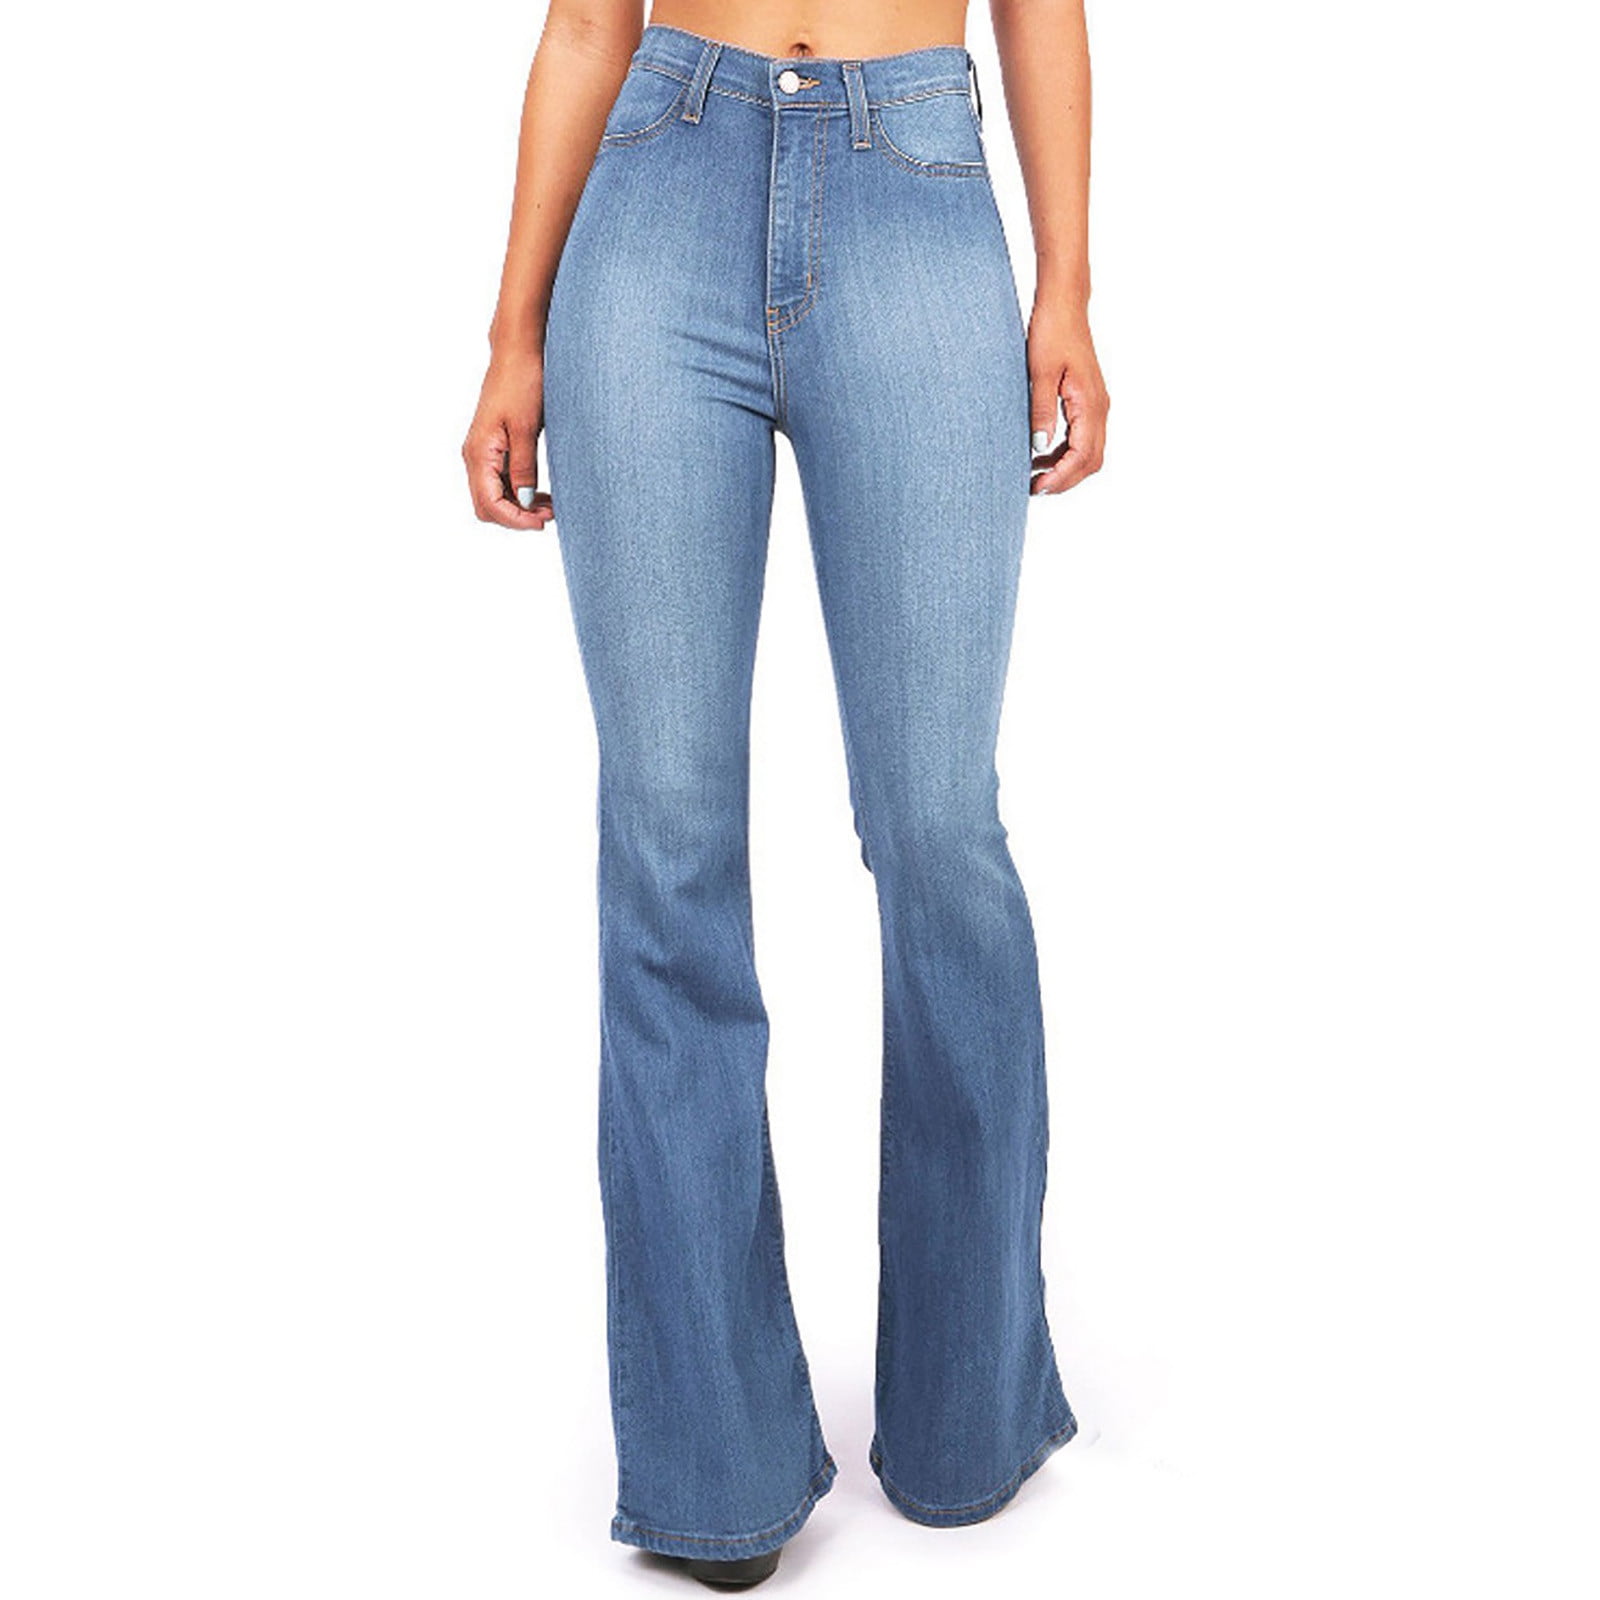 Buy CZFSWT Bell Bottom Jeans for Women, High Waisted Flare Jeans for Women  Ripped Stretchy Bell Bottoms Pants, 327-blue, XS at